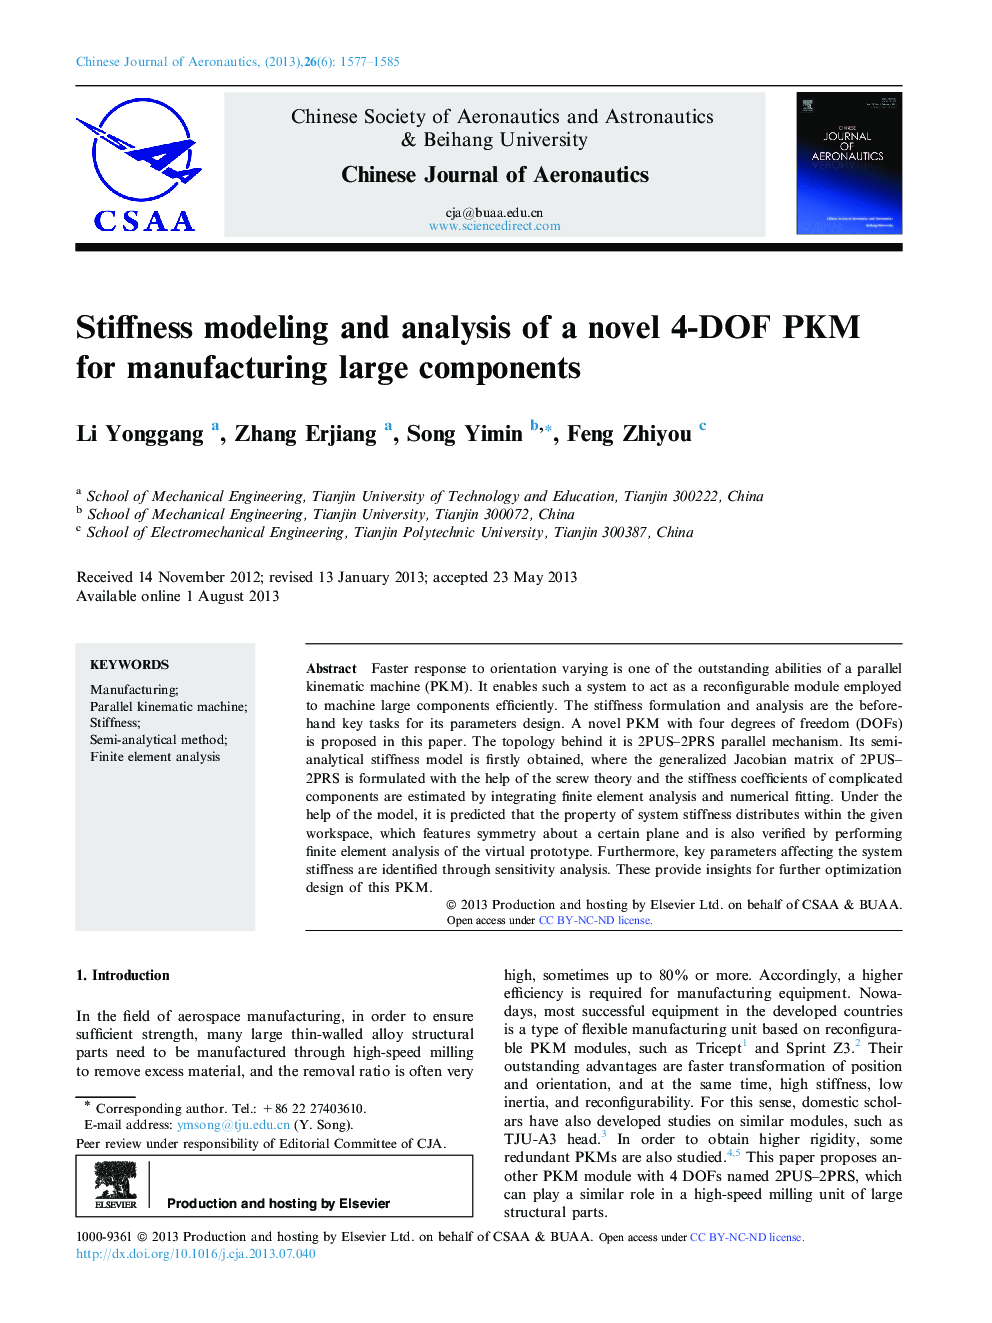 Stiffness modeling and analysis of a novel 4-DOF PKM for manufacturing large components 